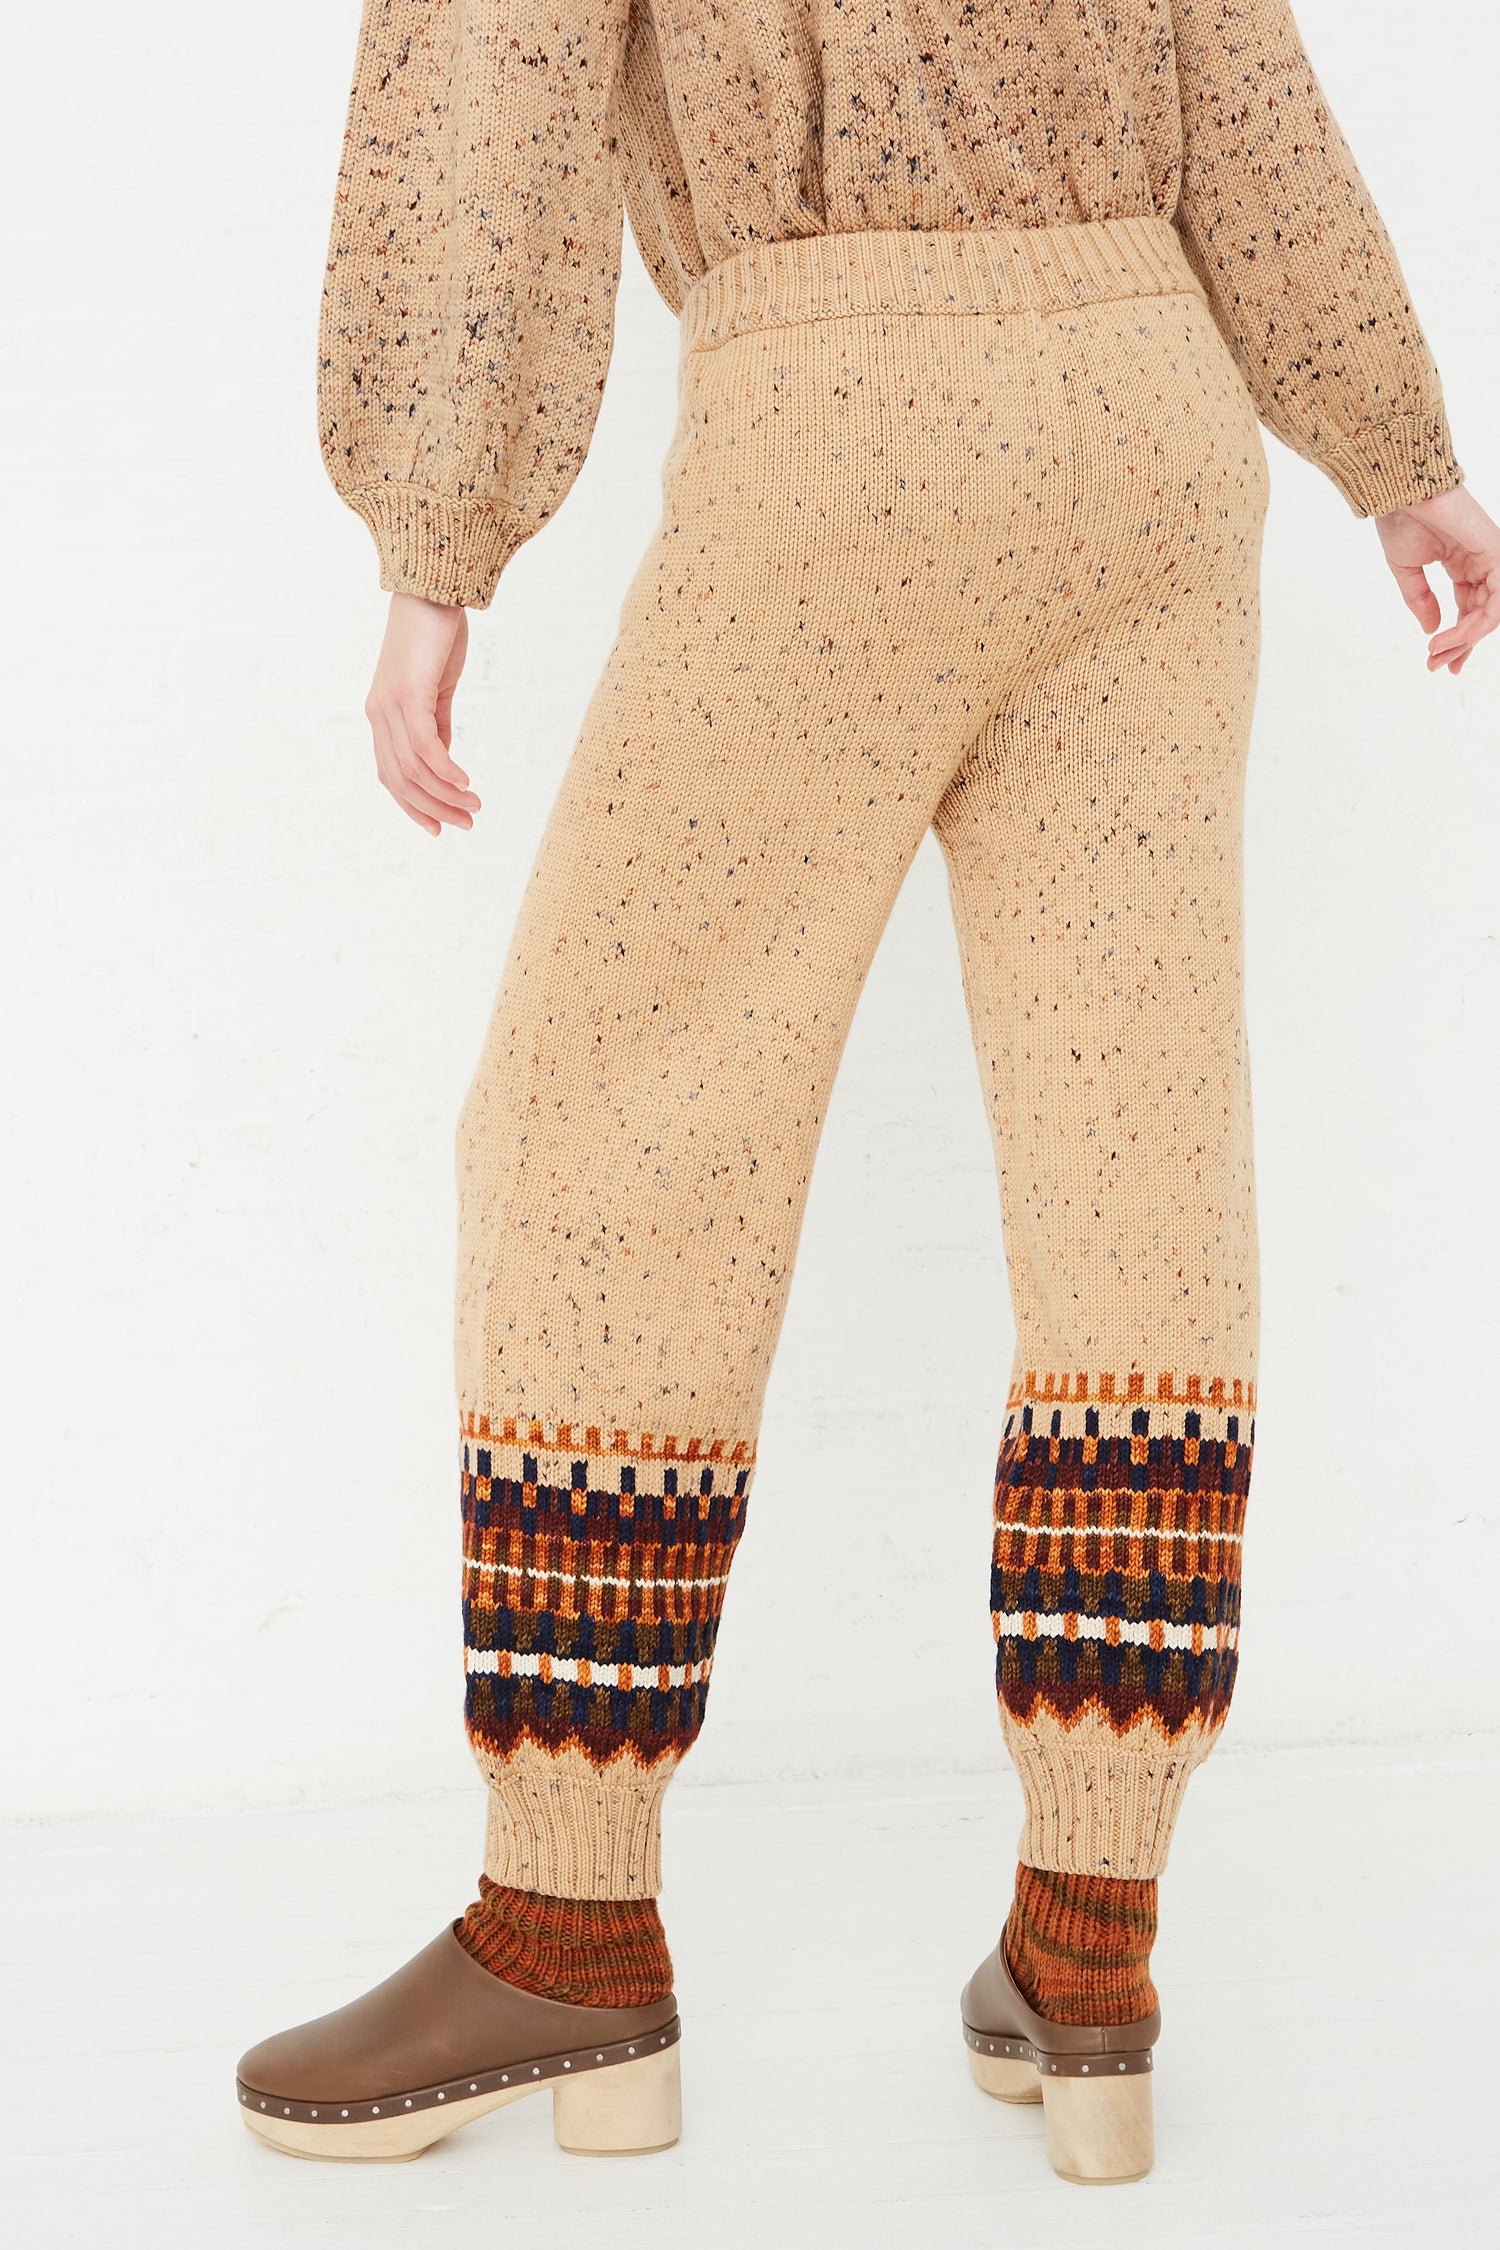 The back view of a woman wearing Misha & Puff's Fair Isle Warm-Up Pant in Seed Confetti jogger pants.